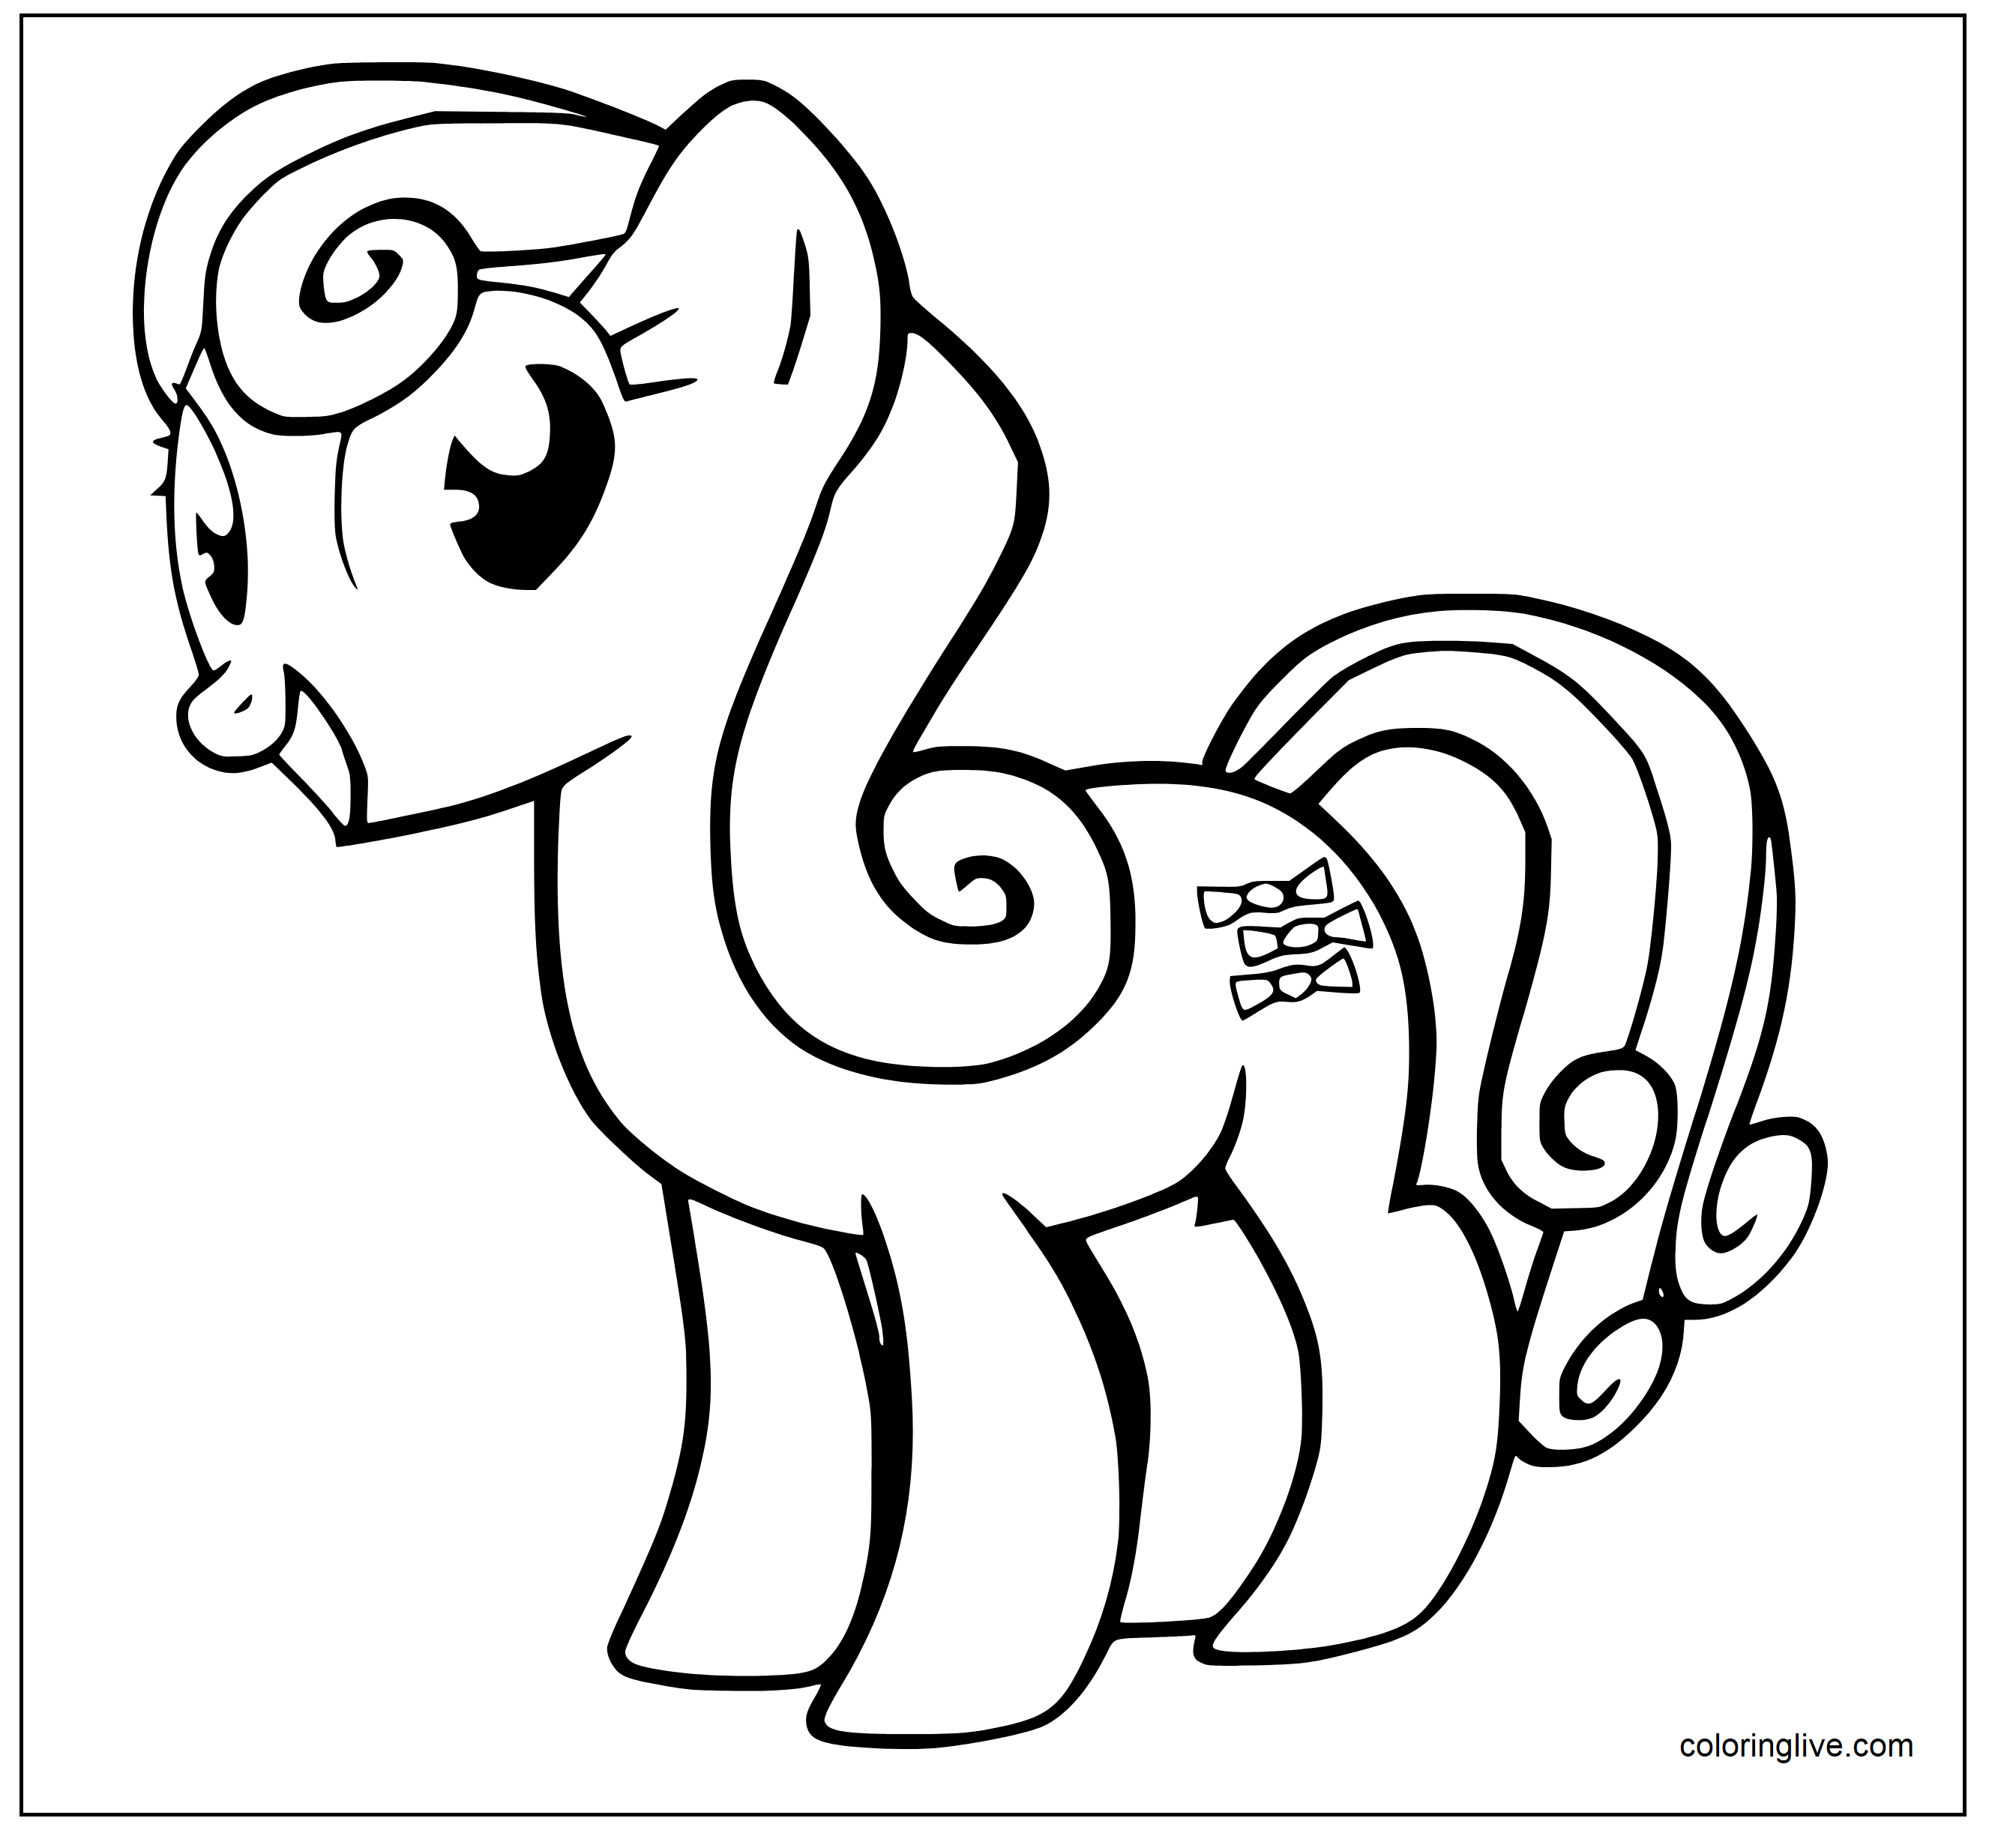 Printable Sweetie Coloring Page for kids.